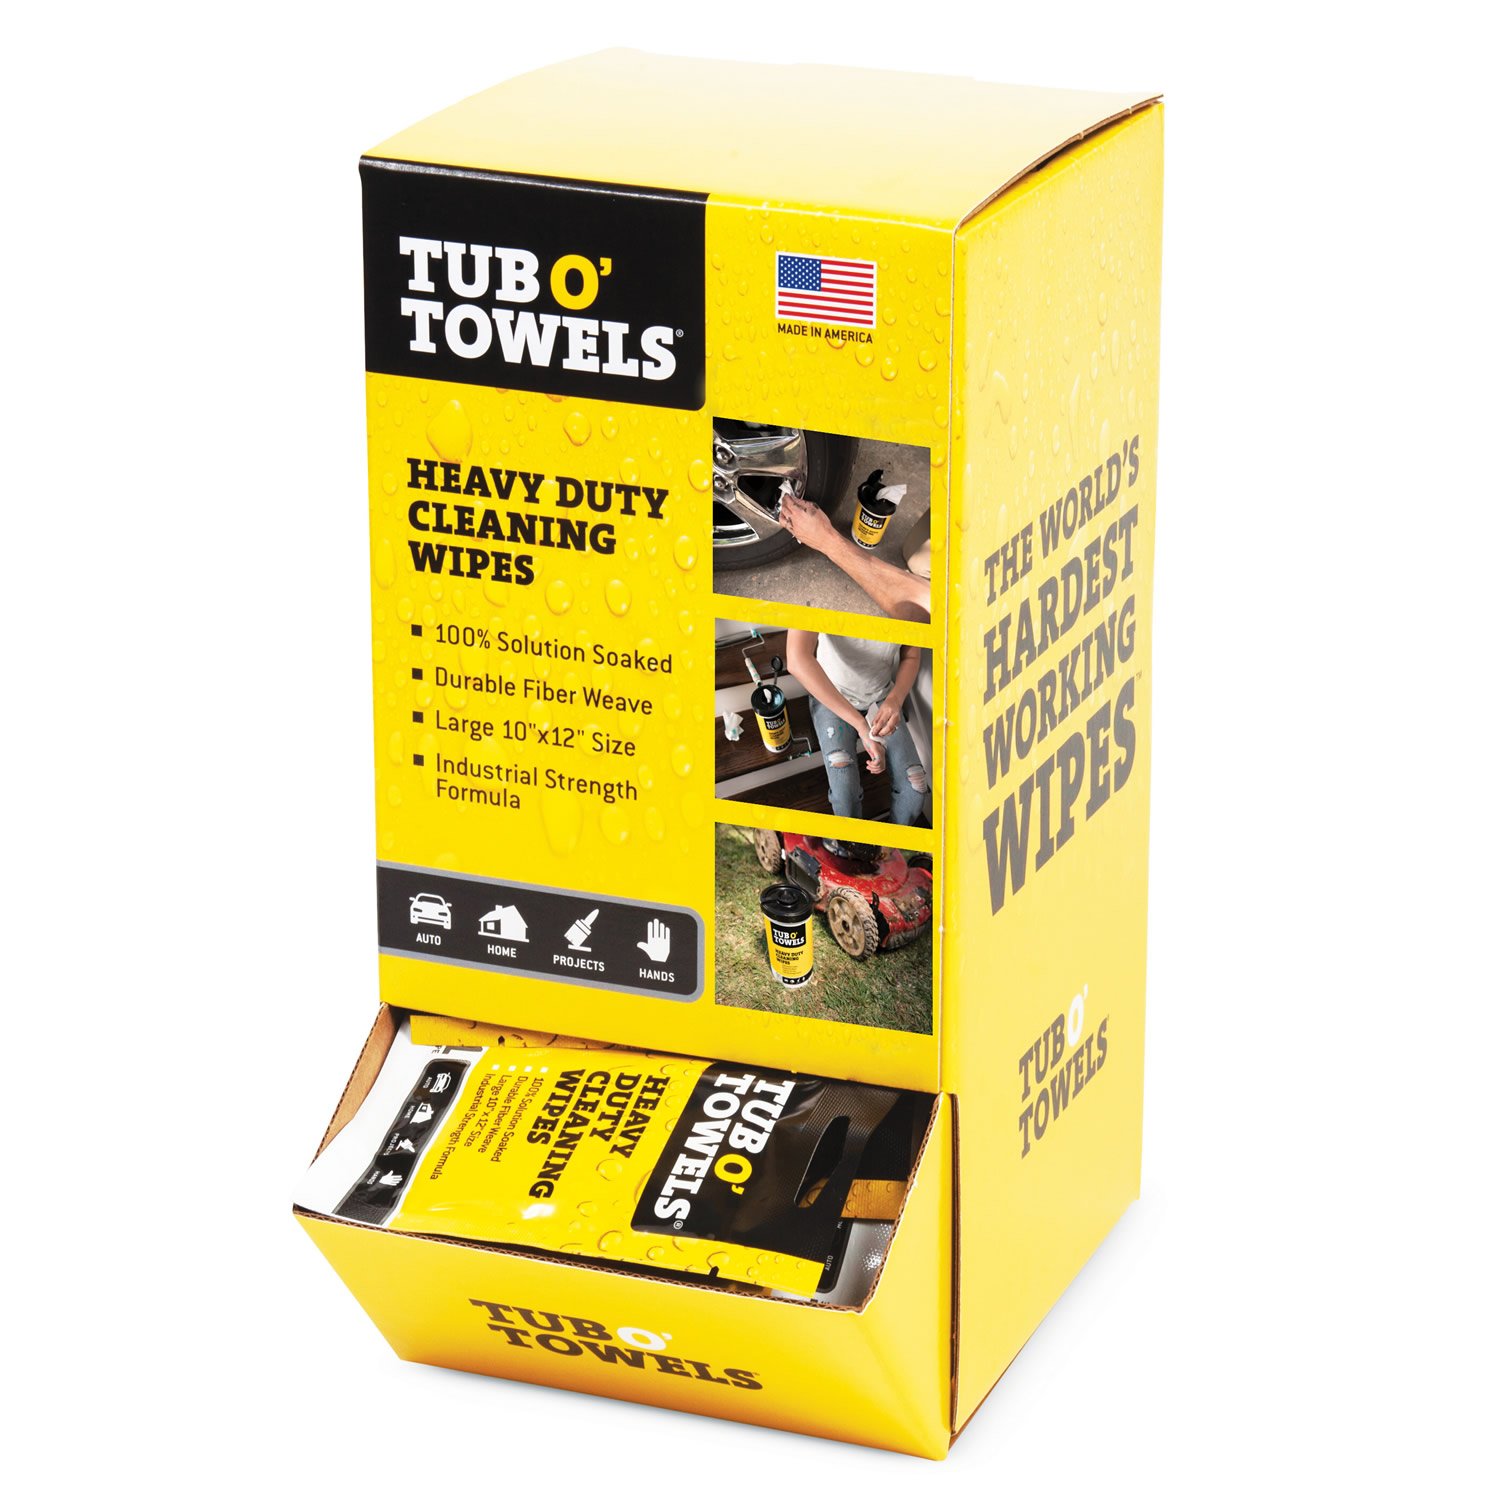 TUB O' TOWELS TW01-GR Heavy-Duty Cleaning Wipes, 12 in W, 10 in L, Light Citrus, 100 Wipes, Gravity Feed Box